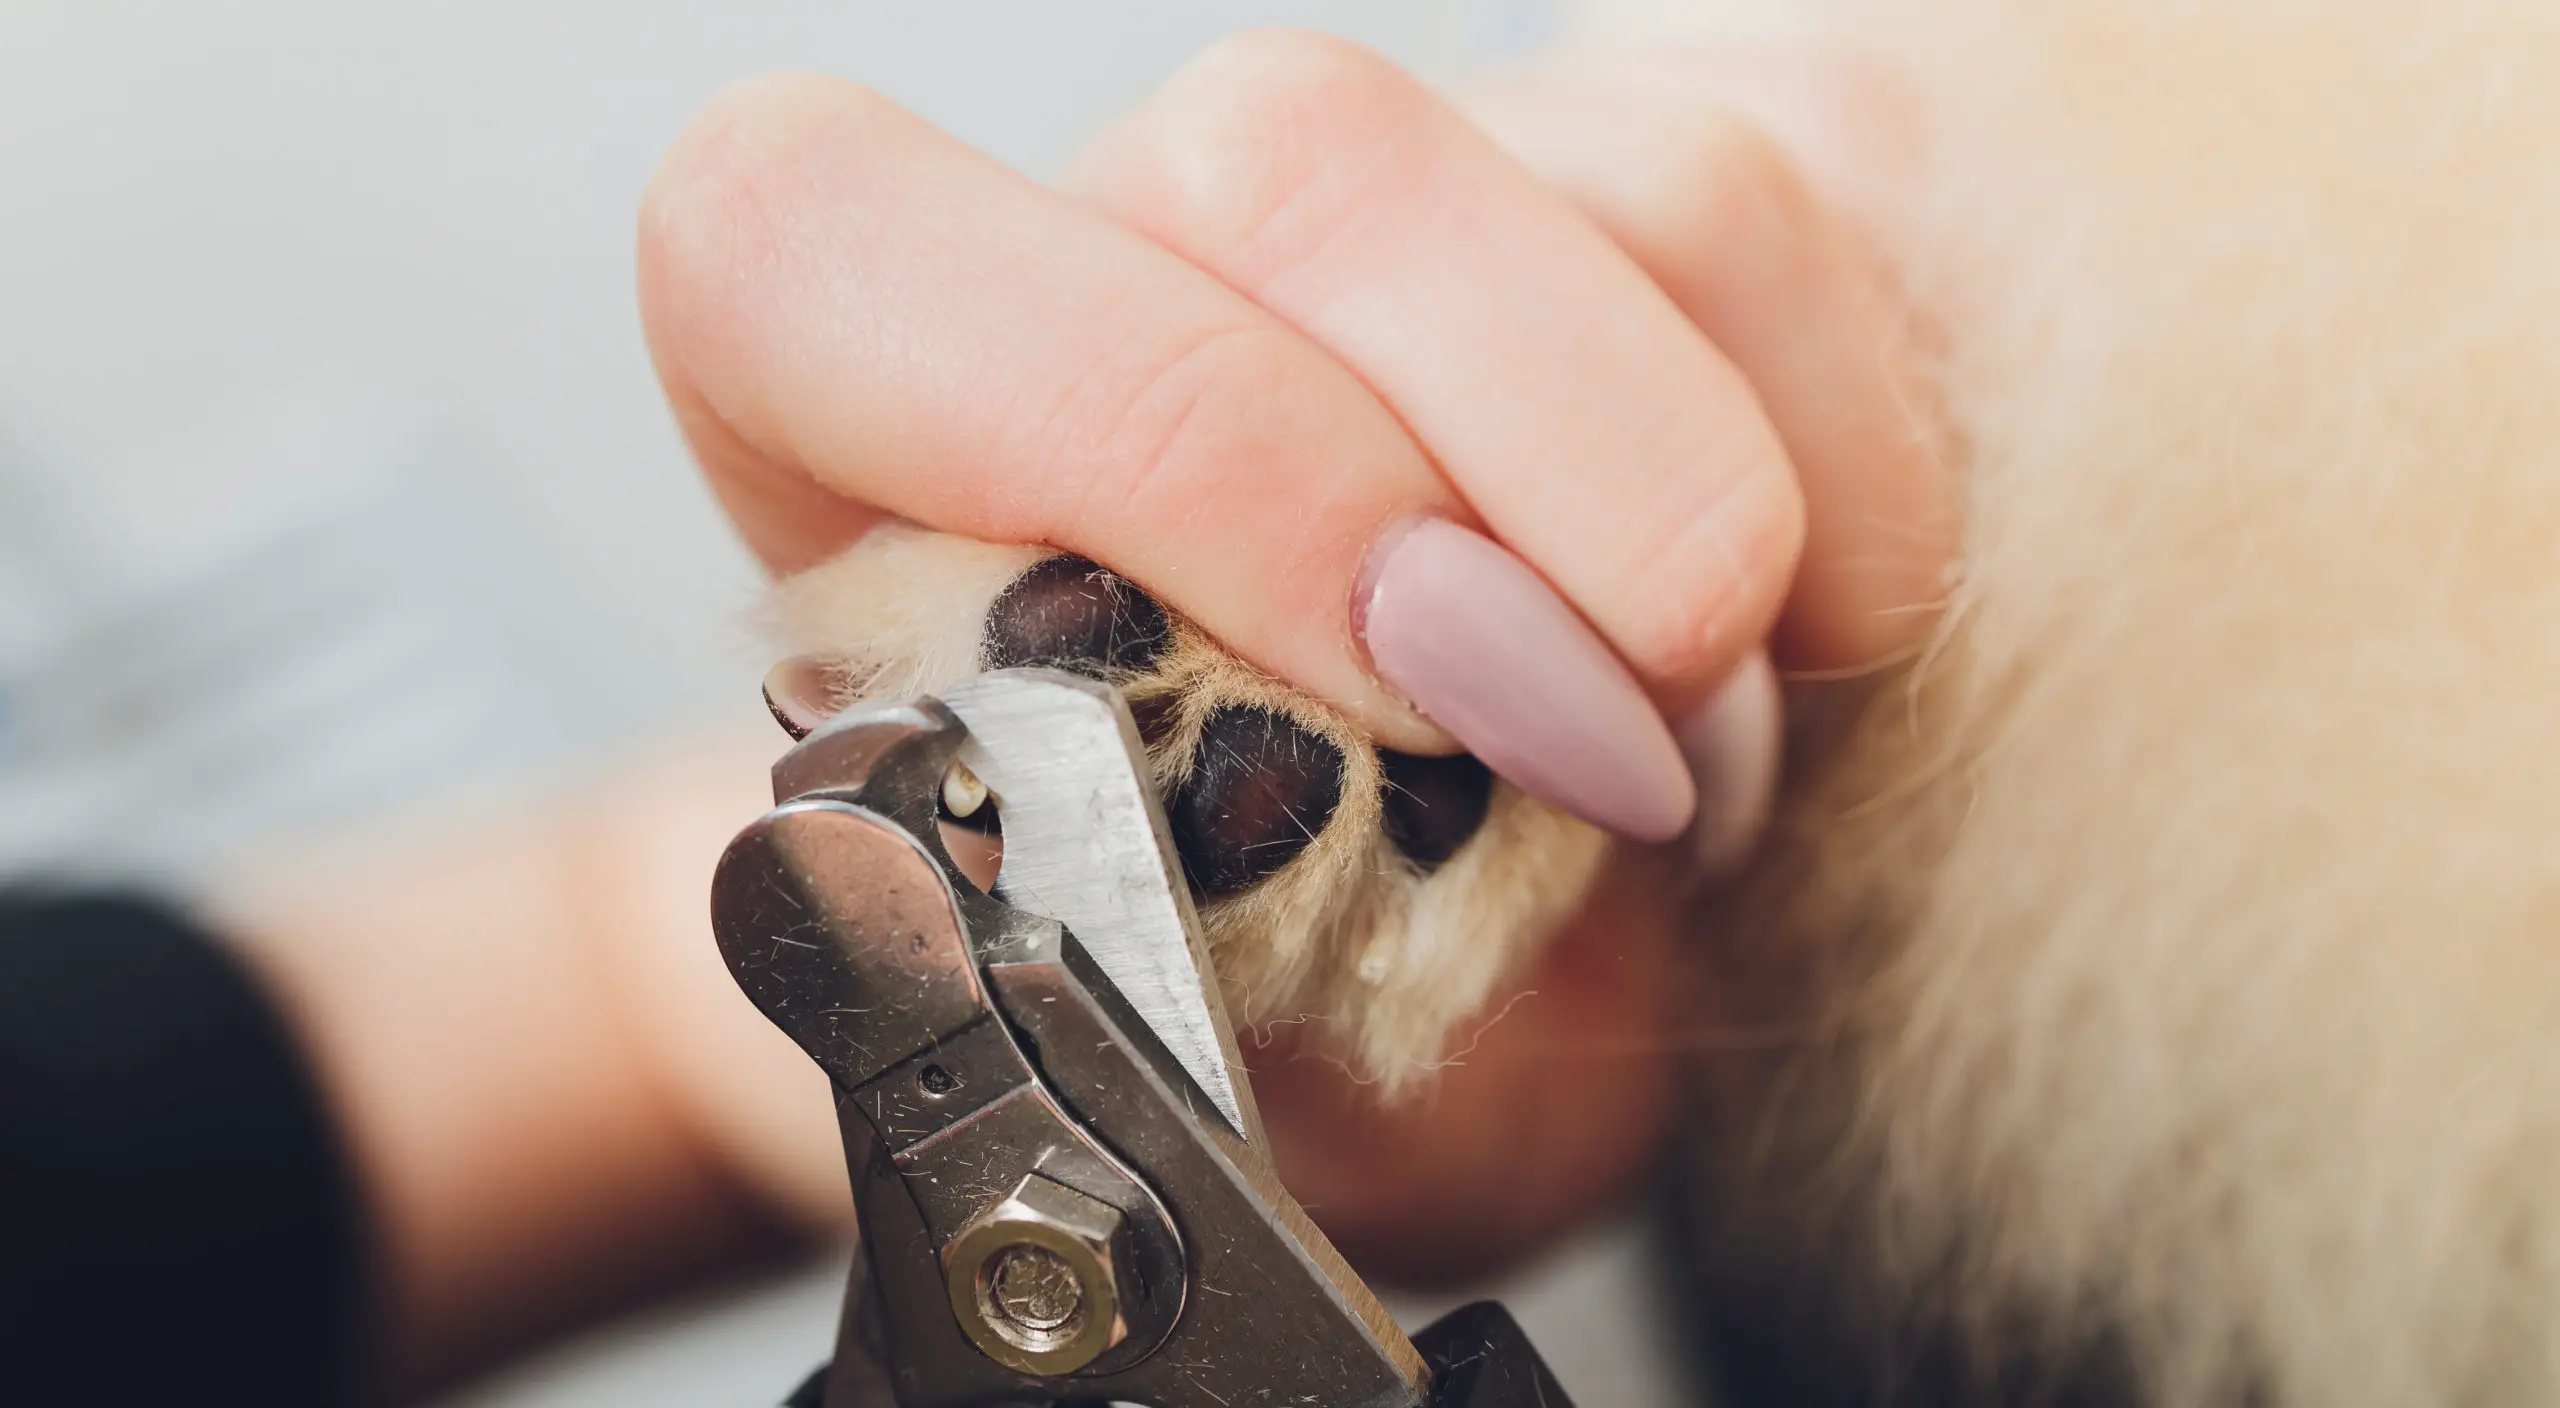 Dog nail care from clipping to filing, and why it's crucial